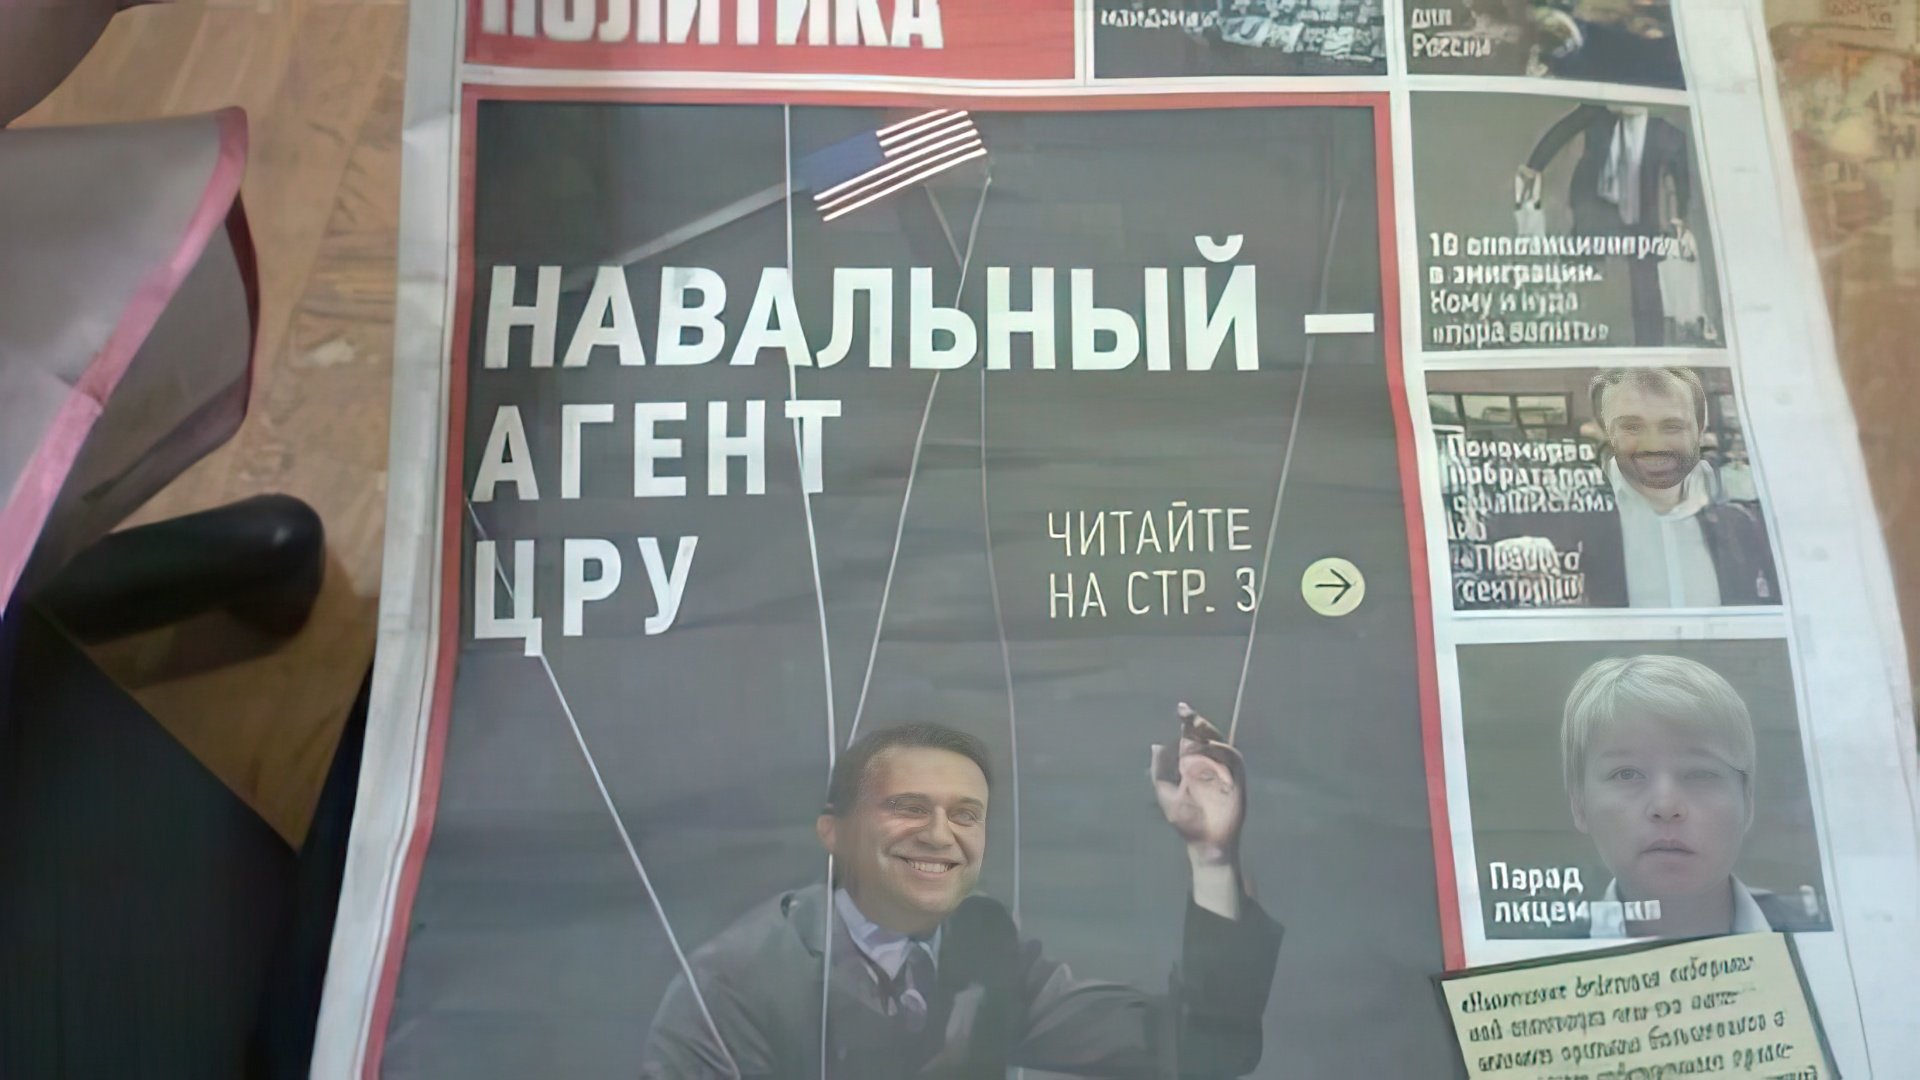 Navalny is often accused of collaborating with Western intelligence agencies